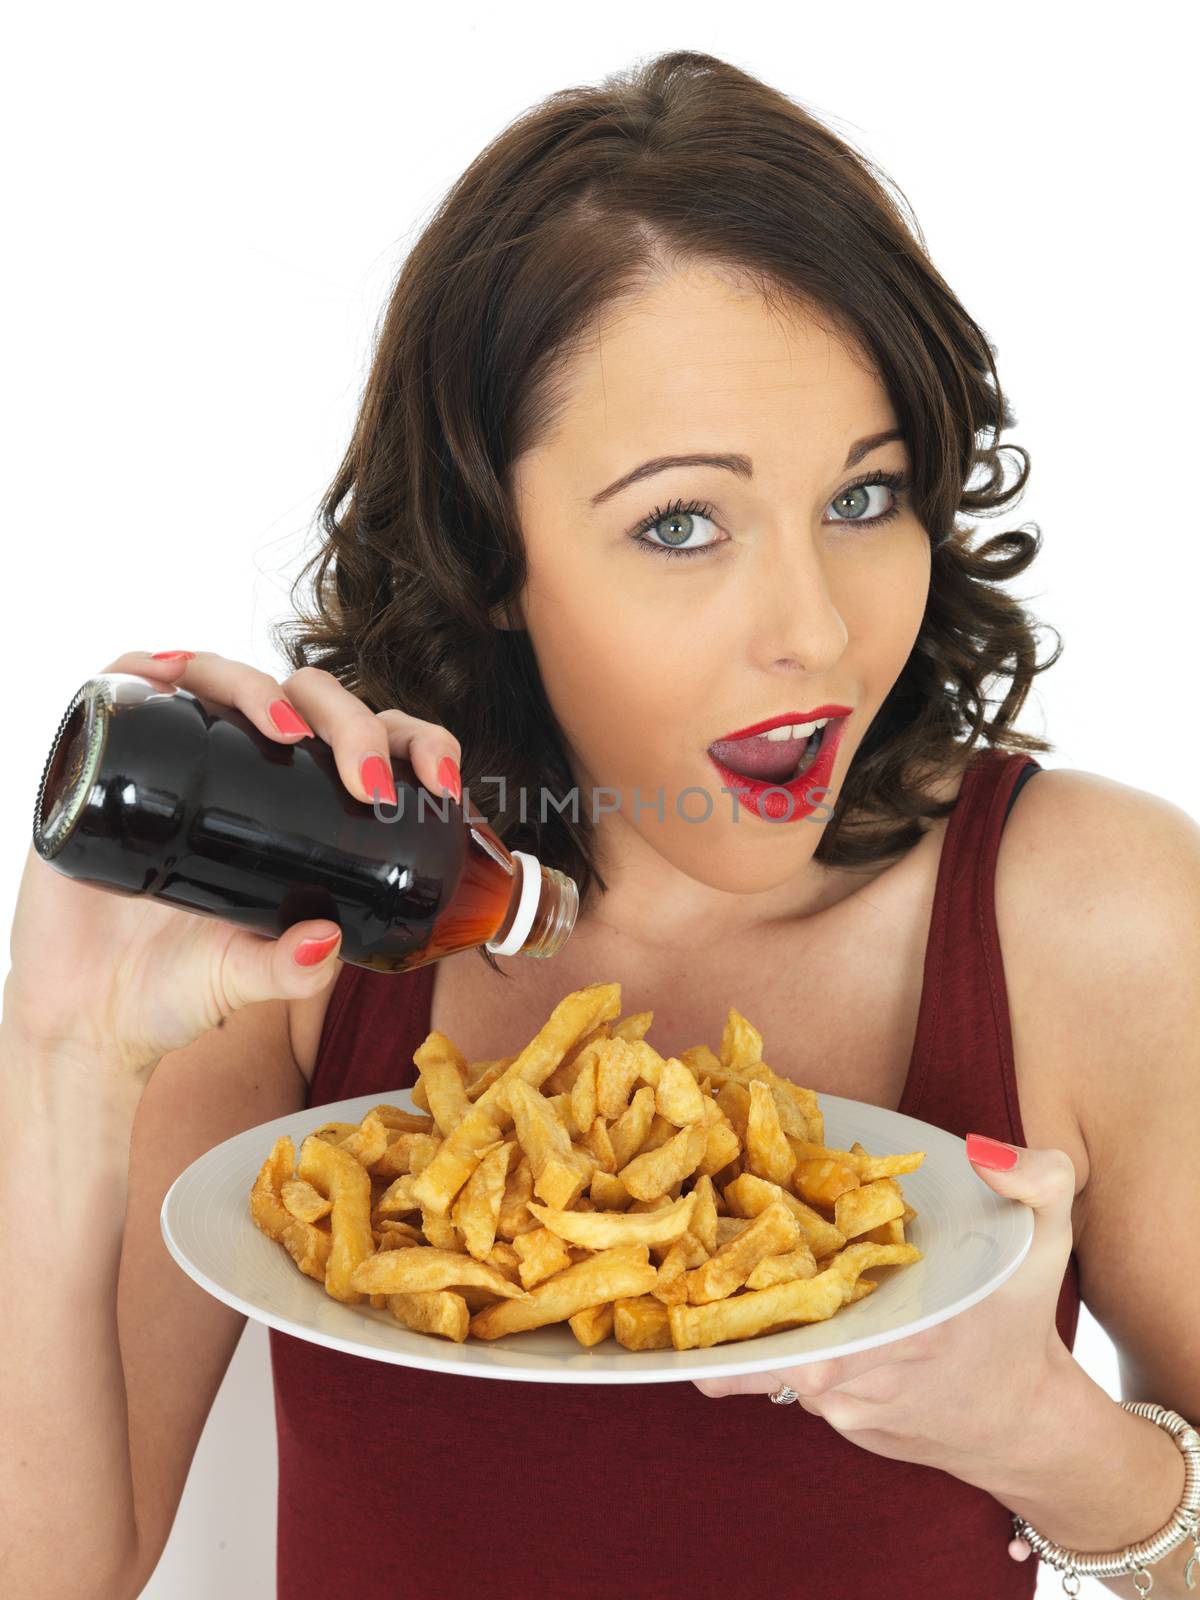 Young Woman Eating a Large Plate of Fried Chips by Whiteboxmedia